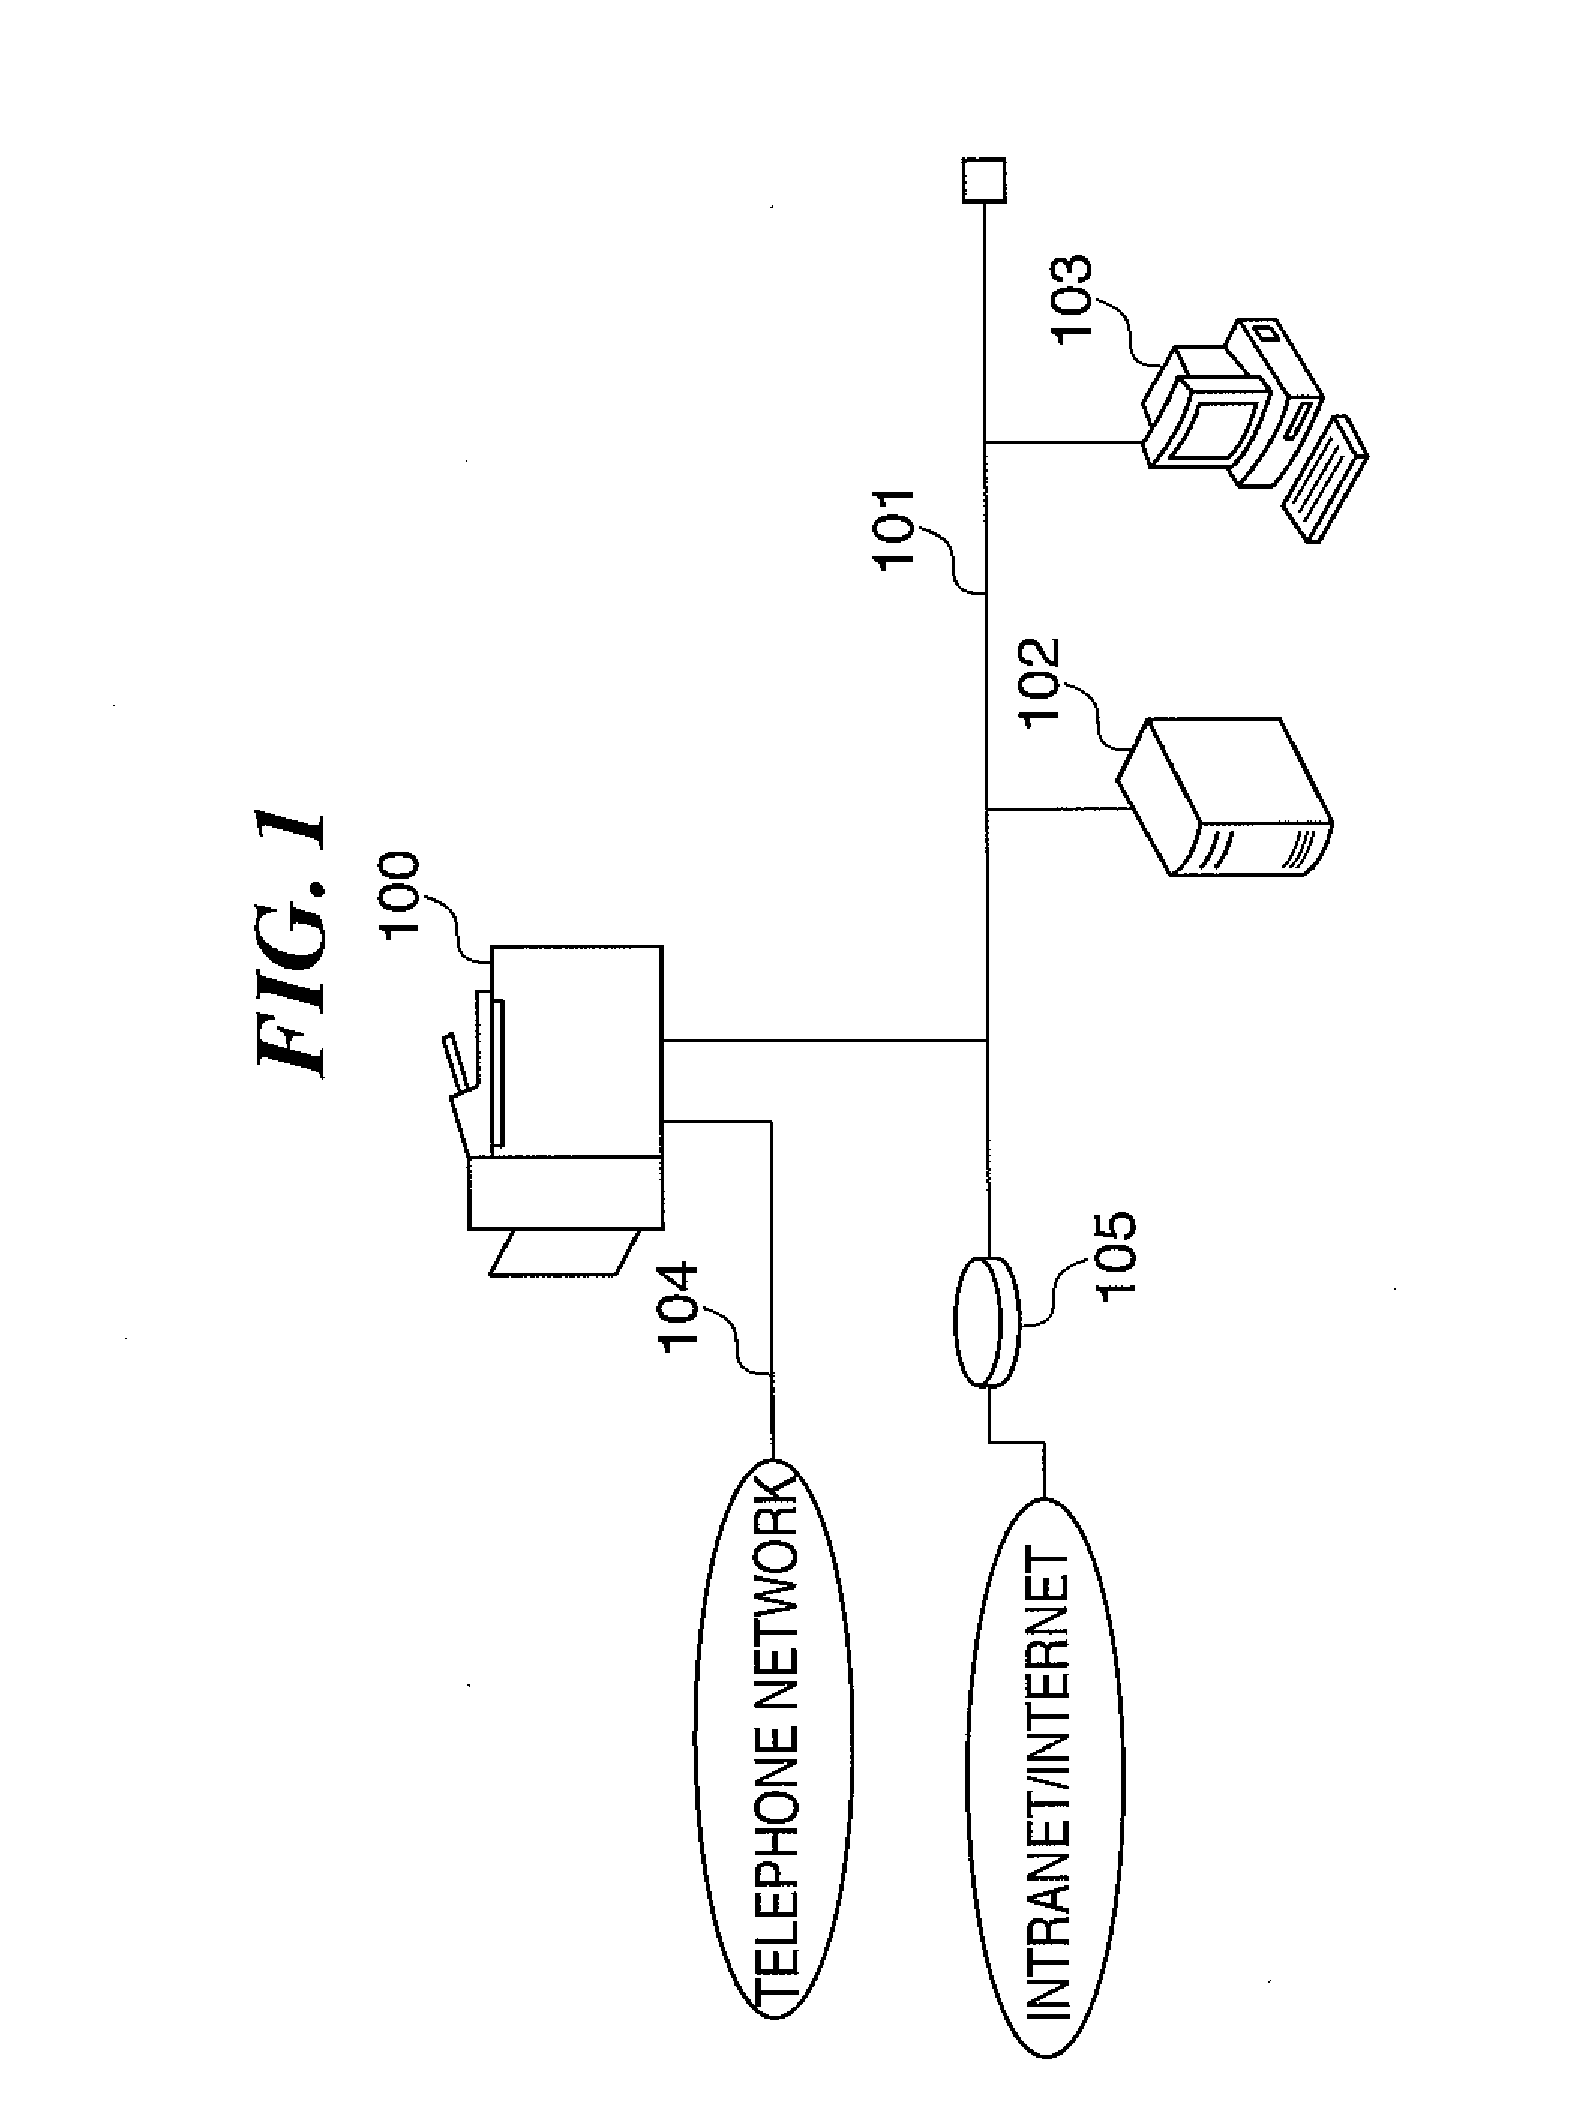 Image forming apparatus, control method for the apparatus, program for implementing the method, and storage medium storing the program